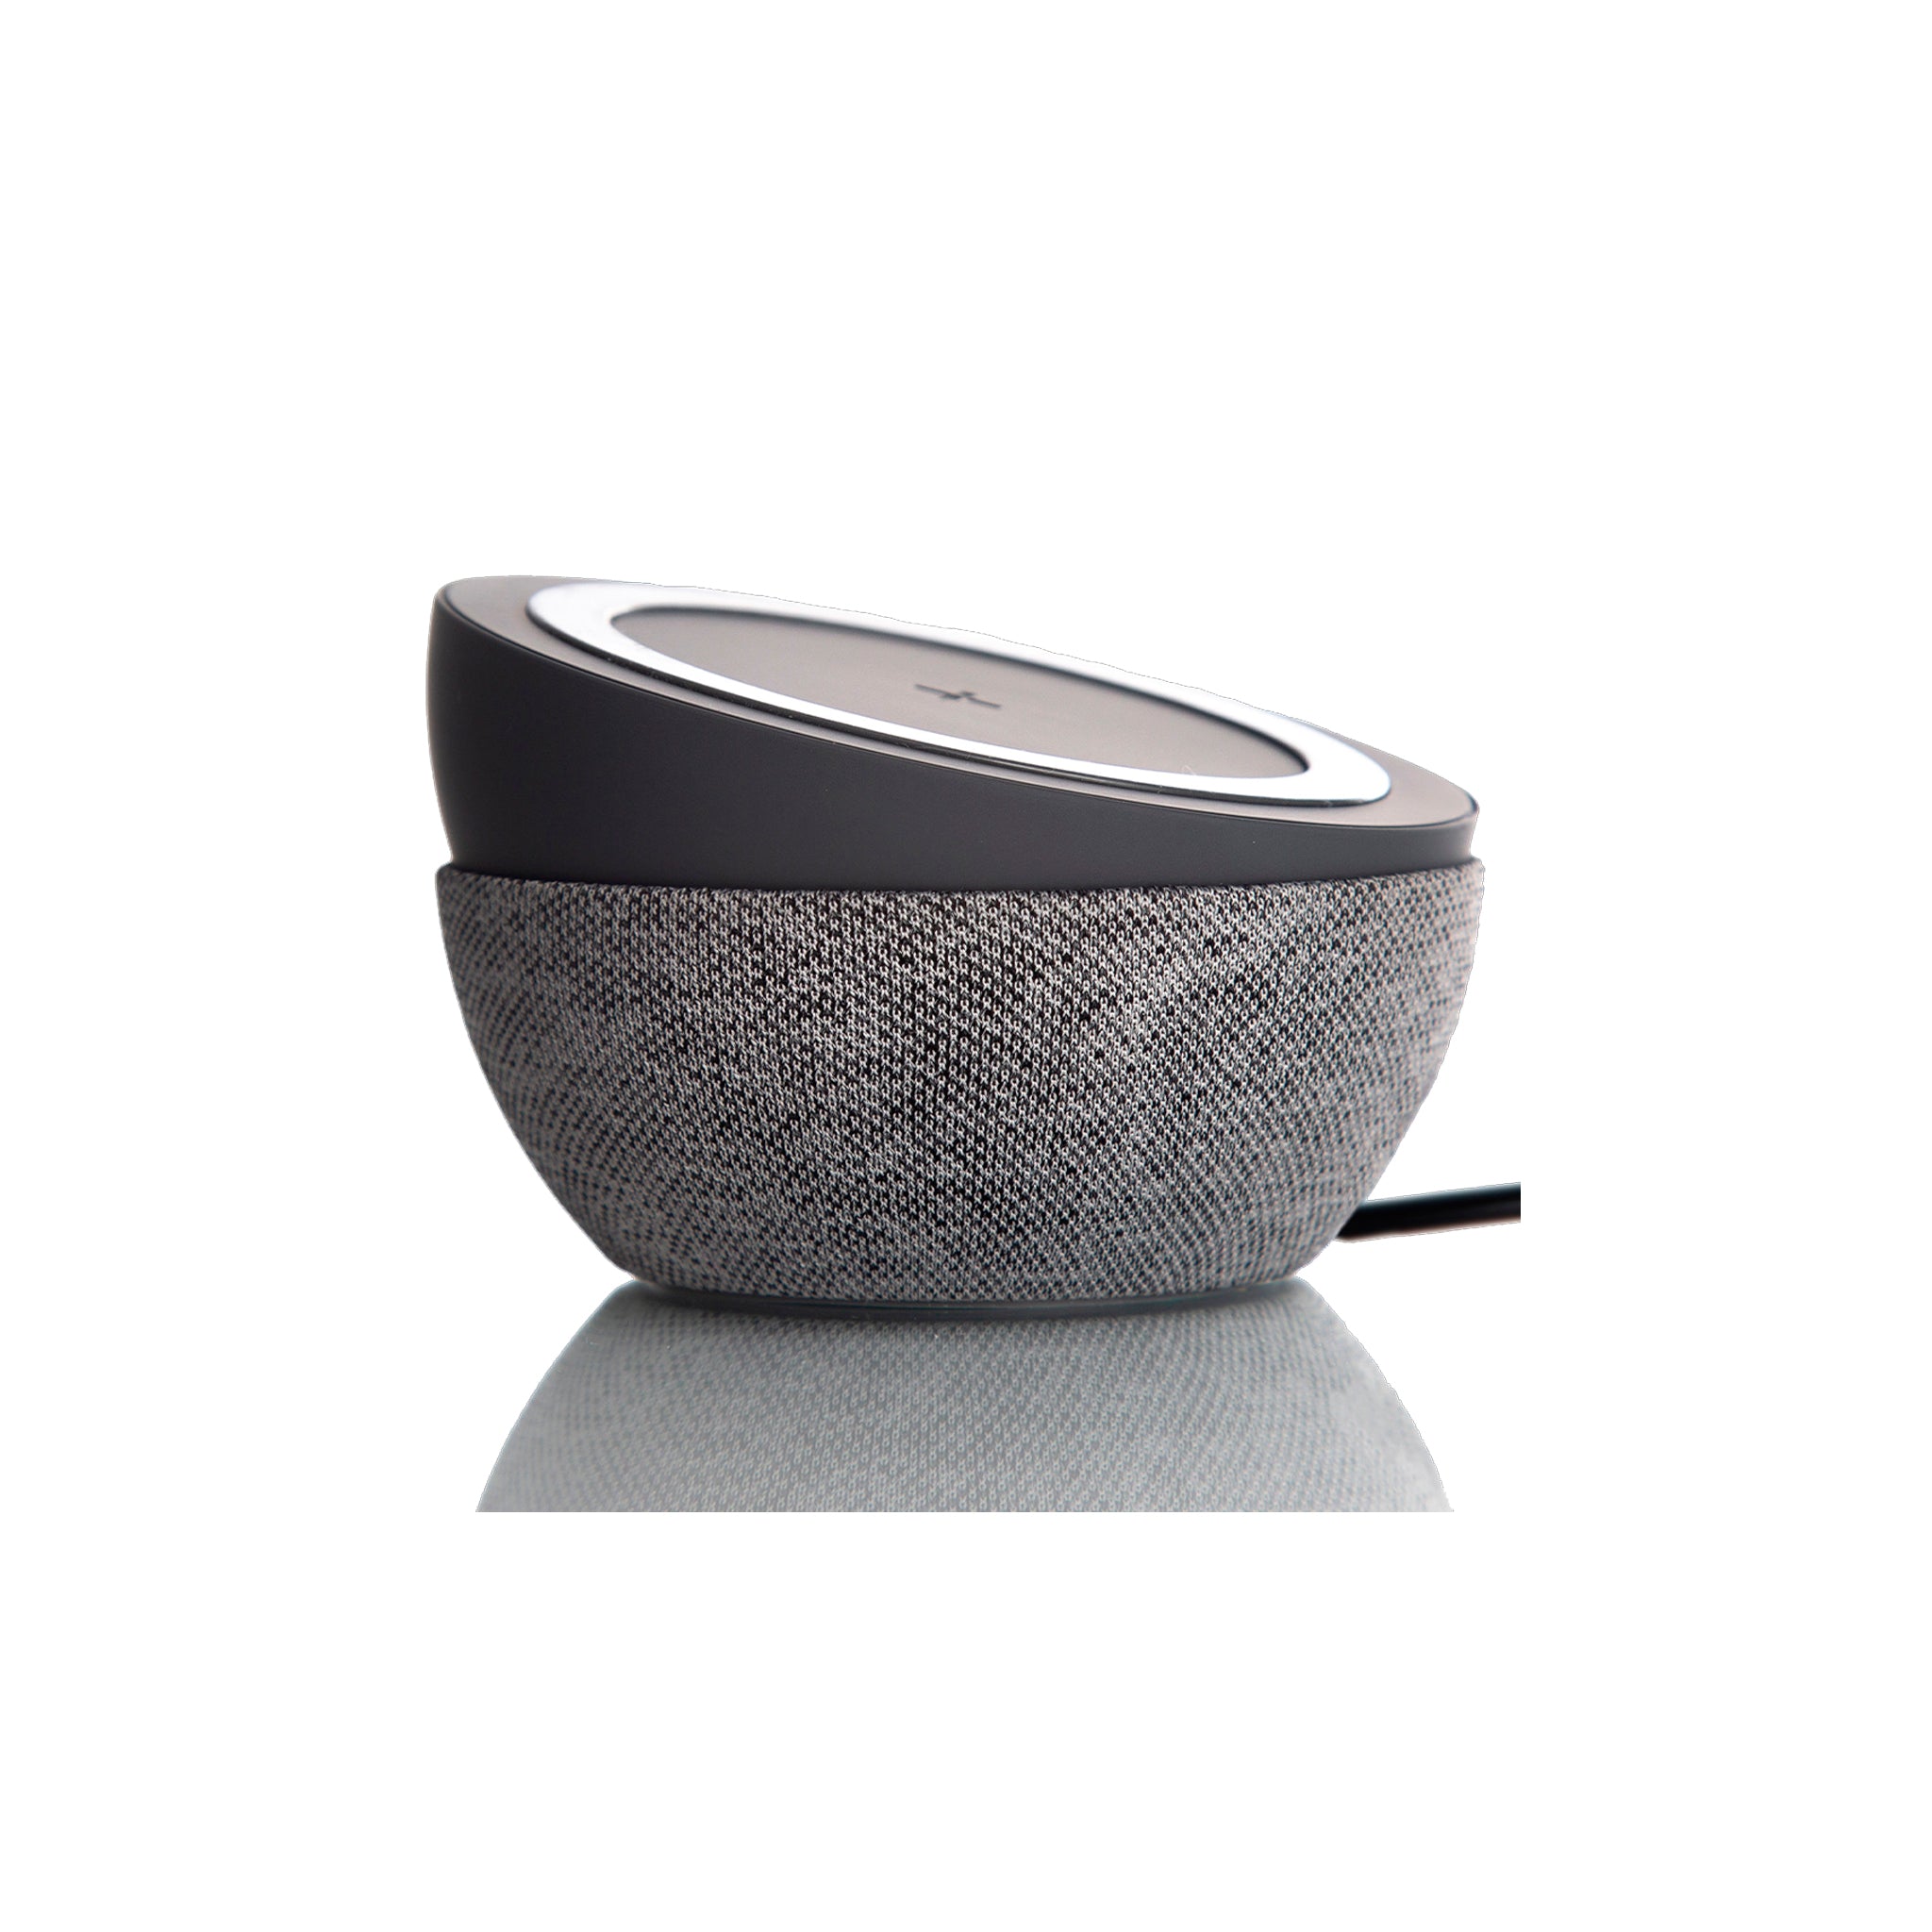 Tylt - Twisty 360 Wireless Charging Pad And Stand 10w - Charcoal And Gray